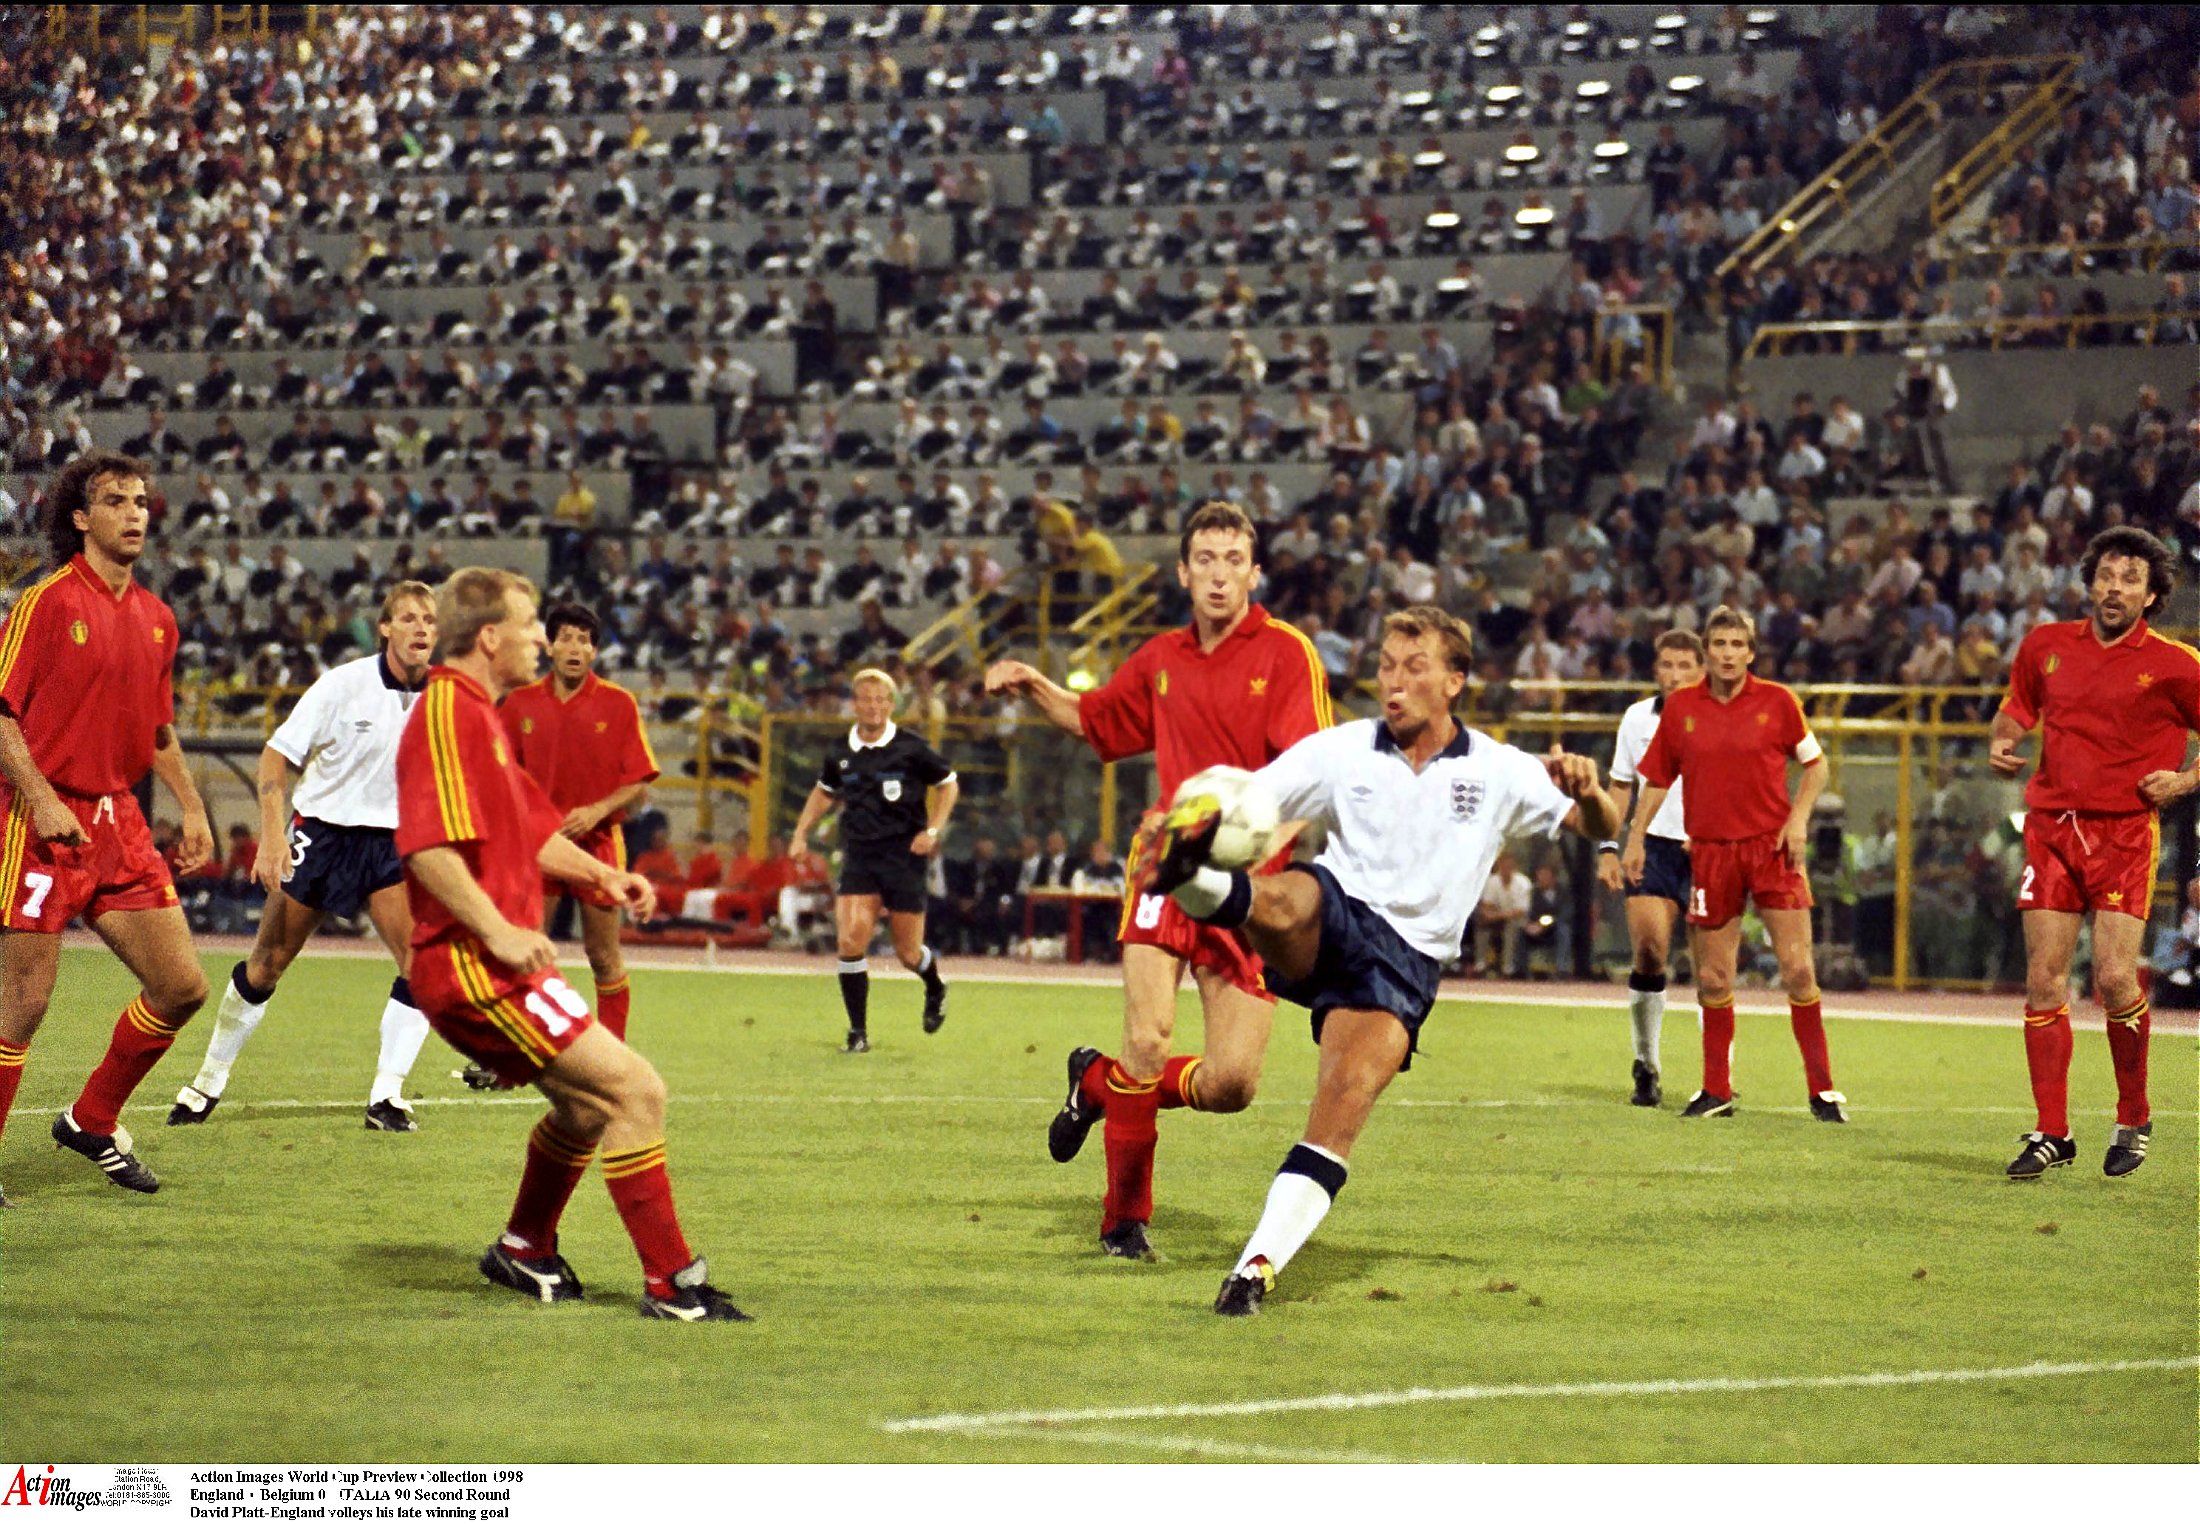 David Platt of England scores the first goal late in extra time to beat Belgium at the 1990 World Cup